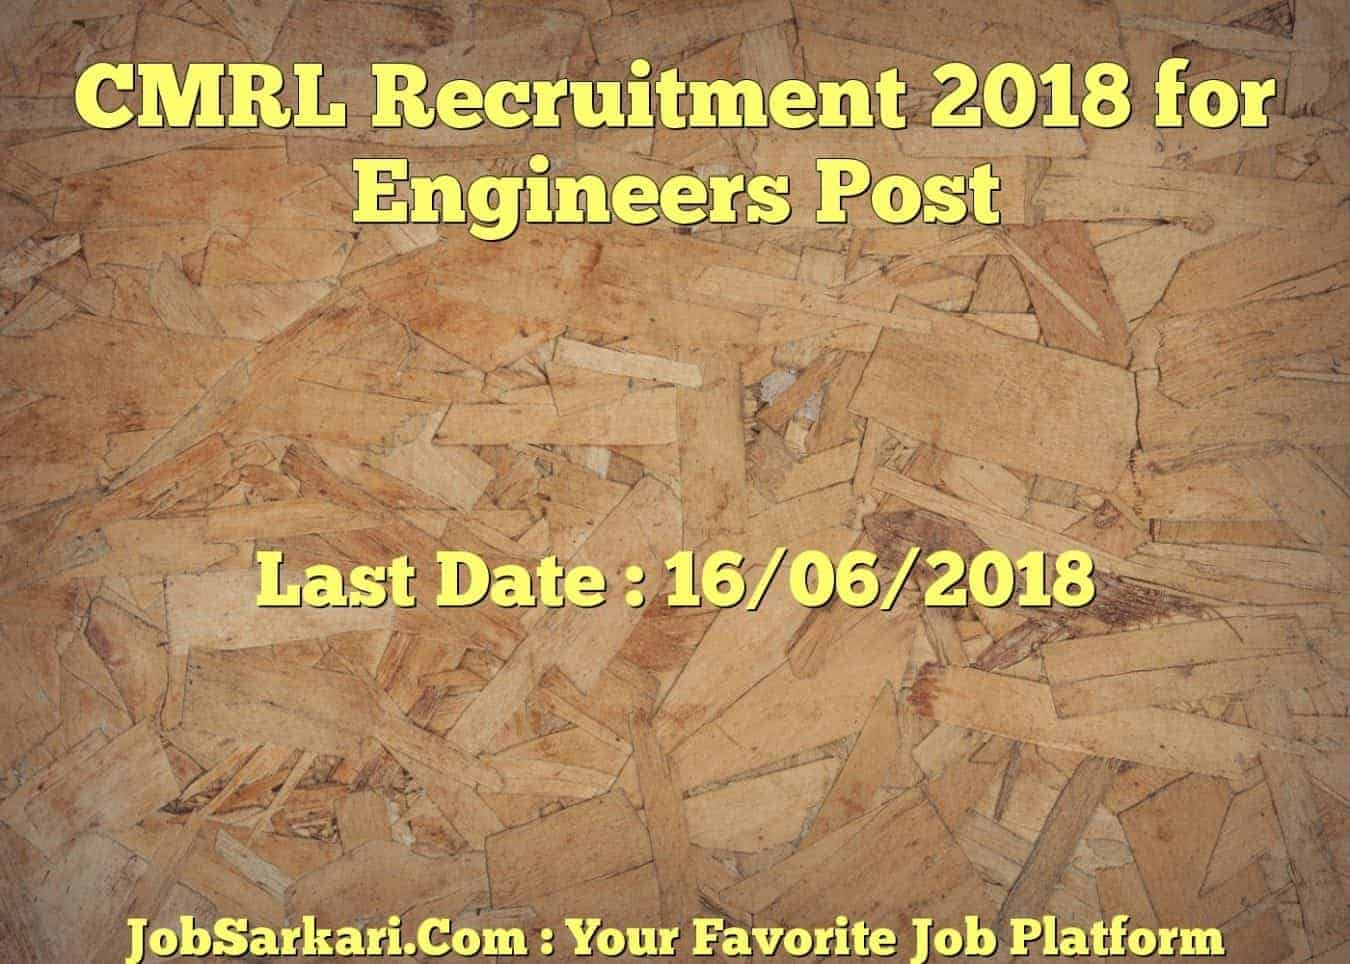 CMRL Recruitment 2018 for Engineers Post